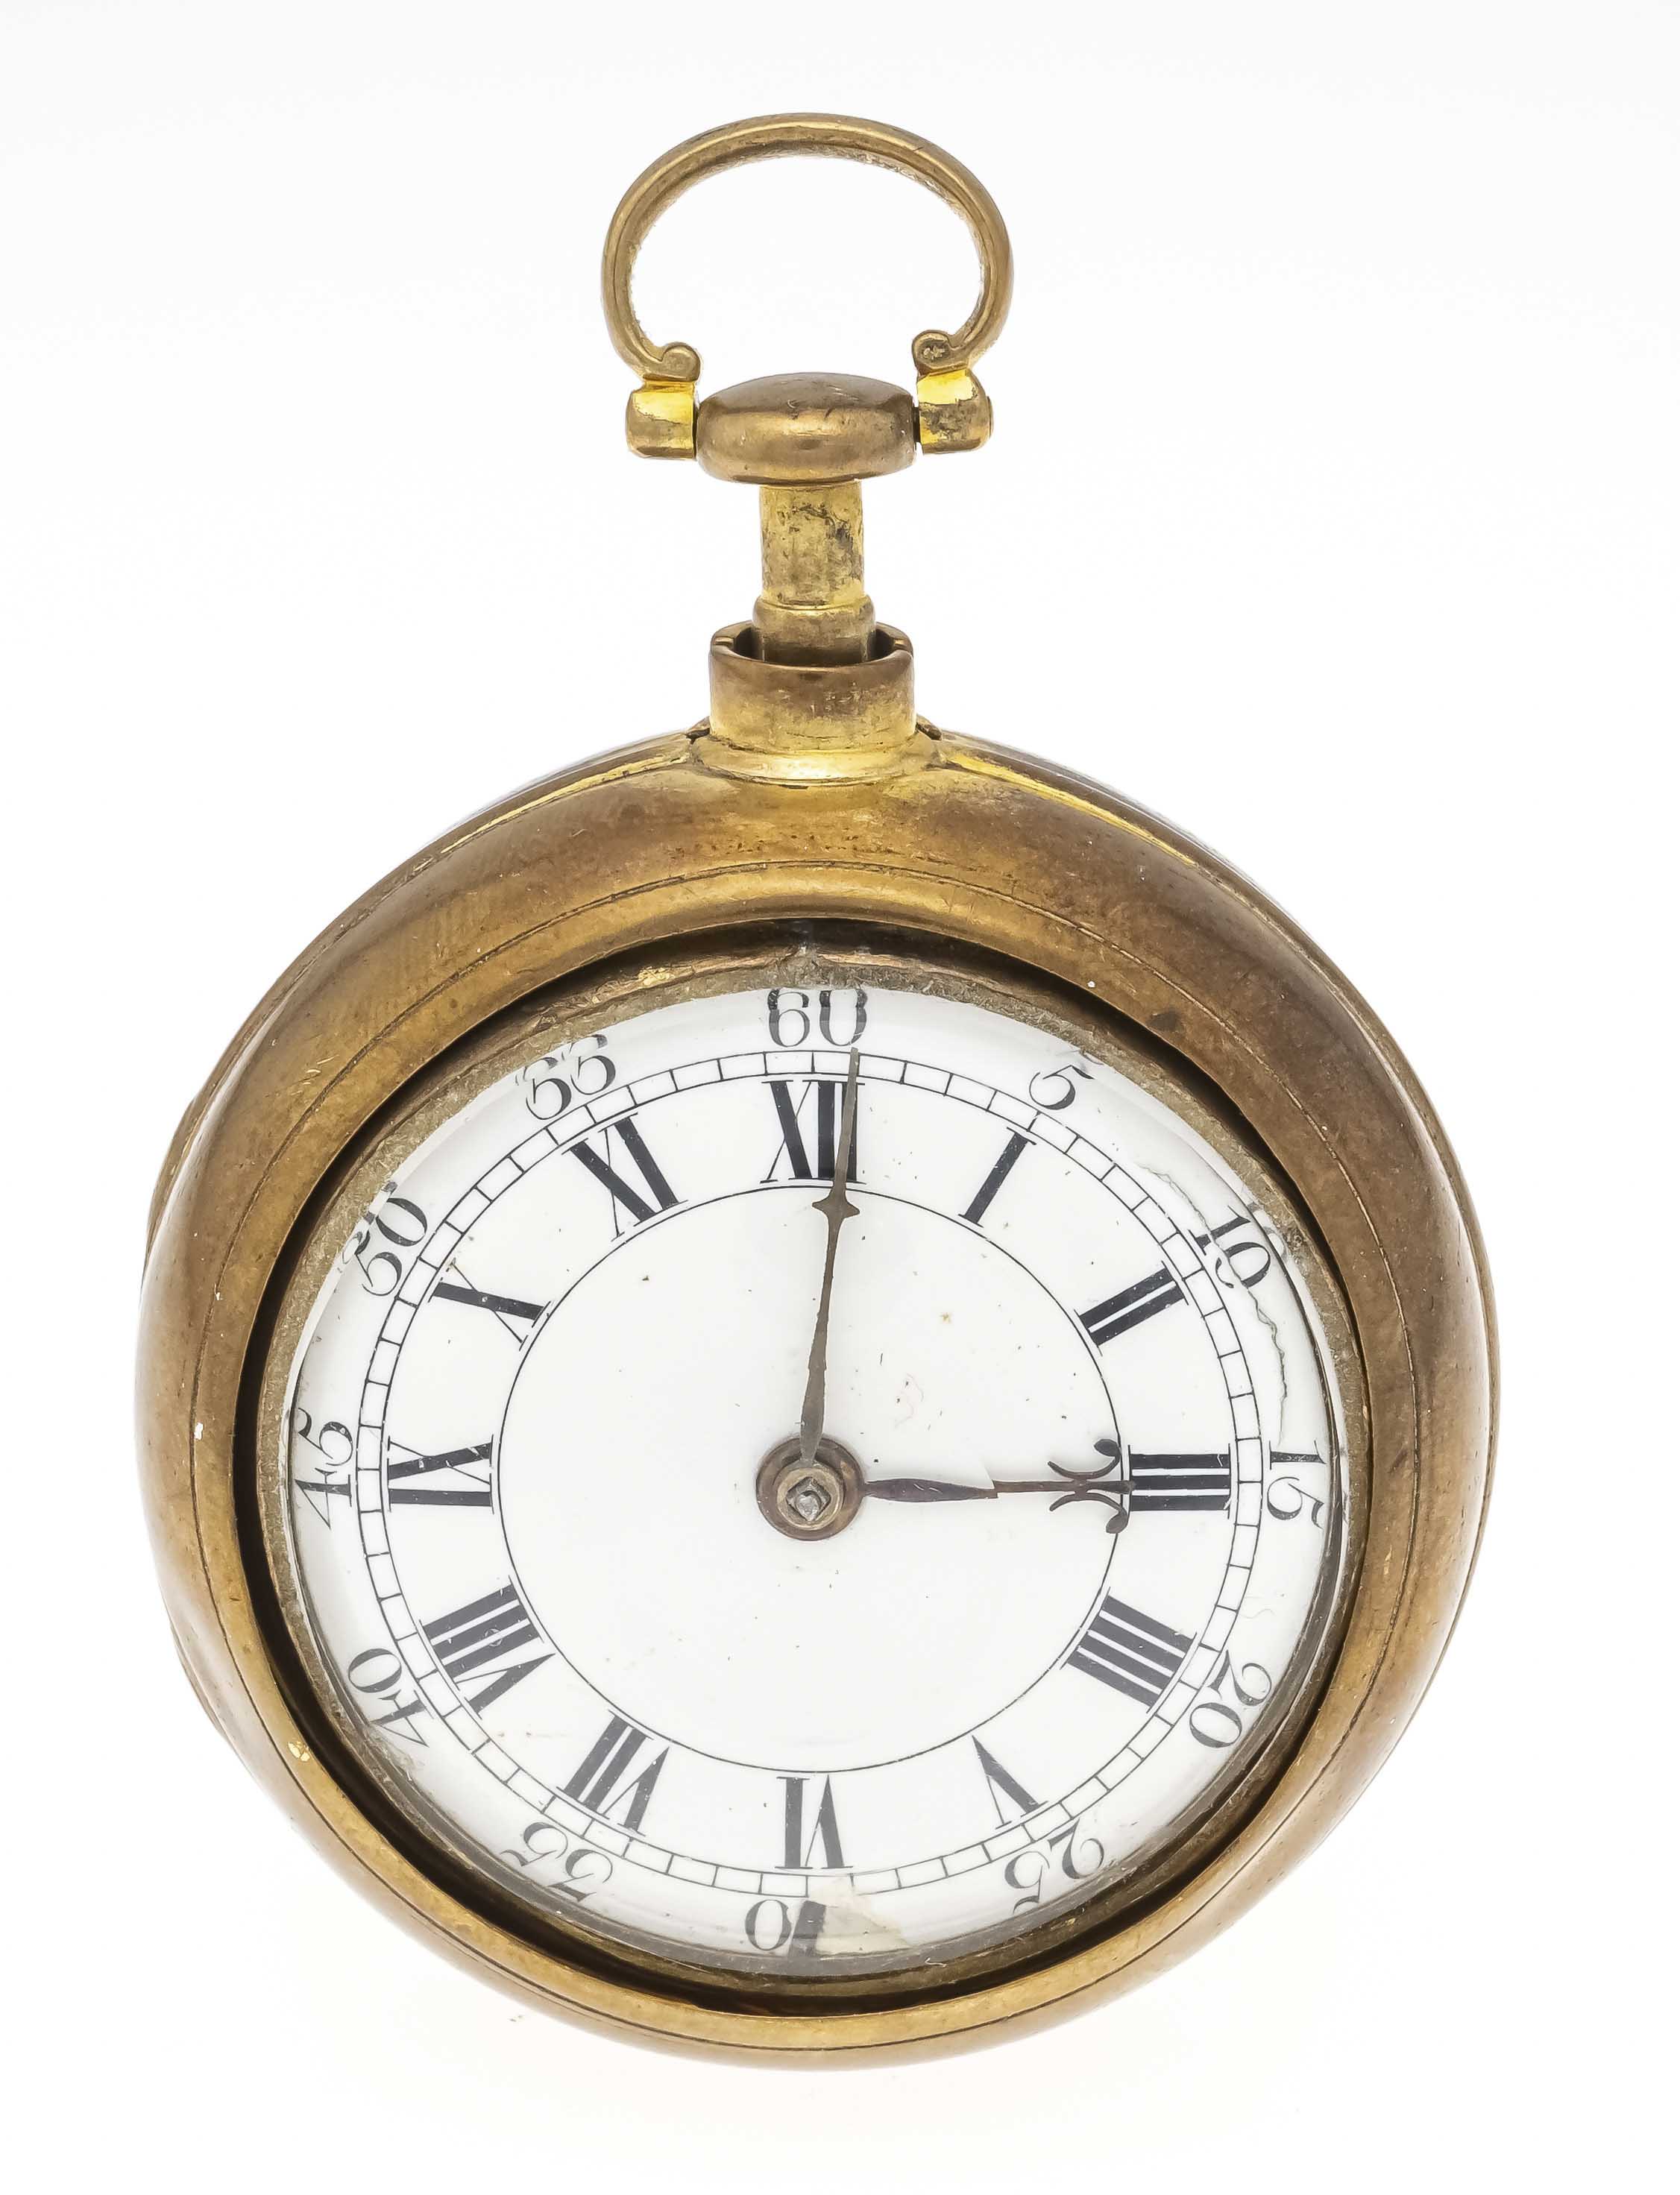 Spindle pocket watch by D. Cambro London, in a gilded over-case, spindle movement with chain